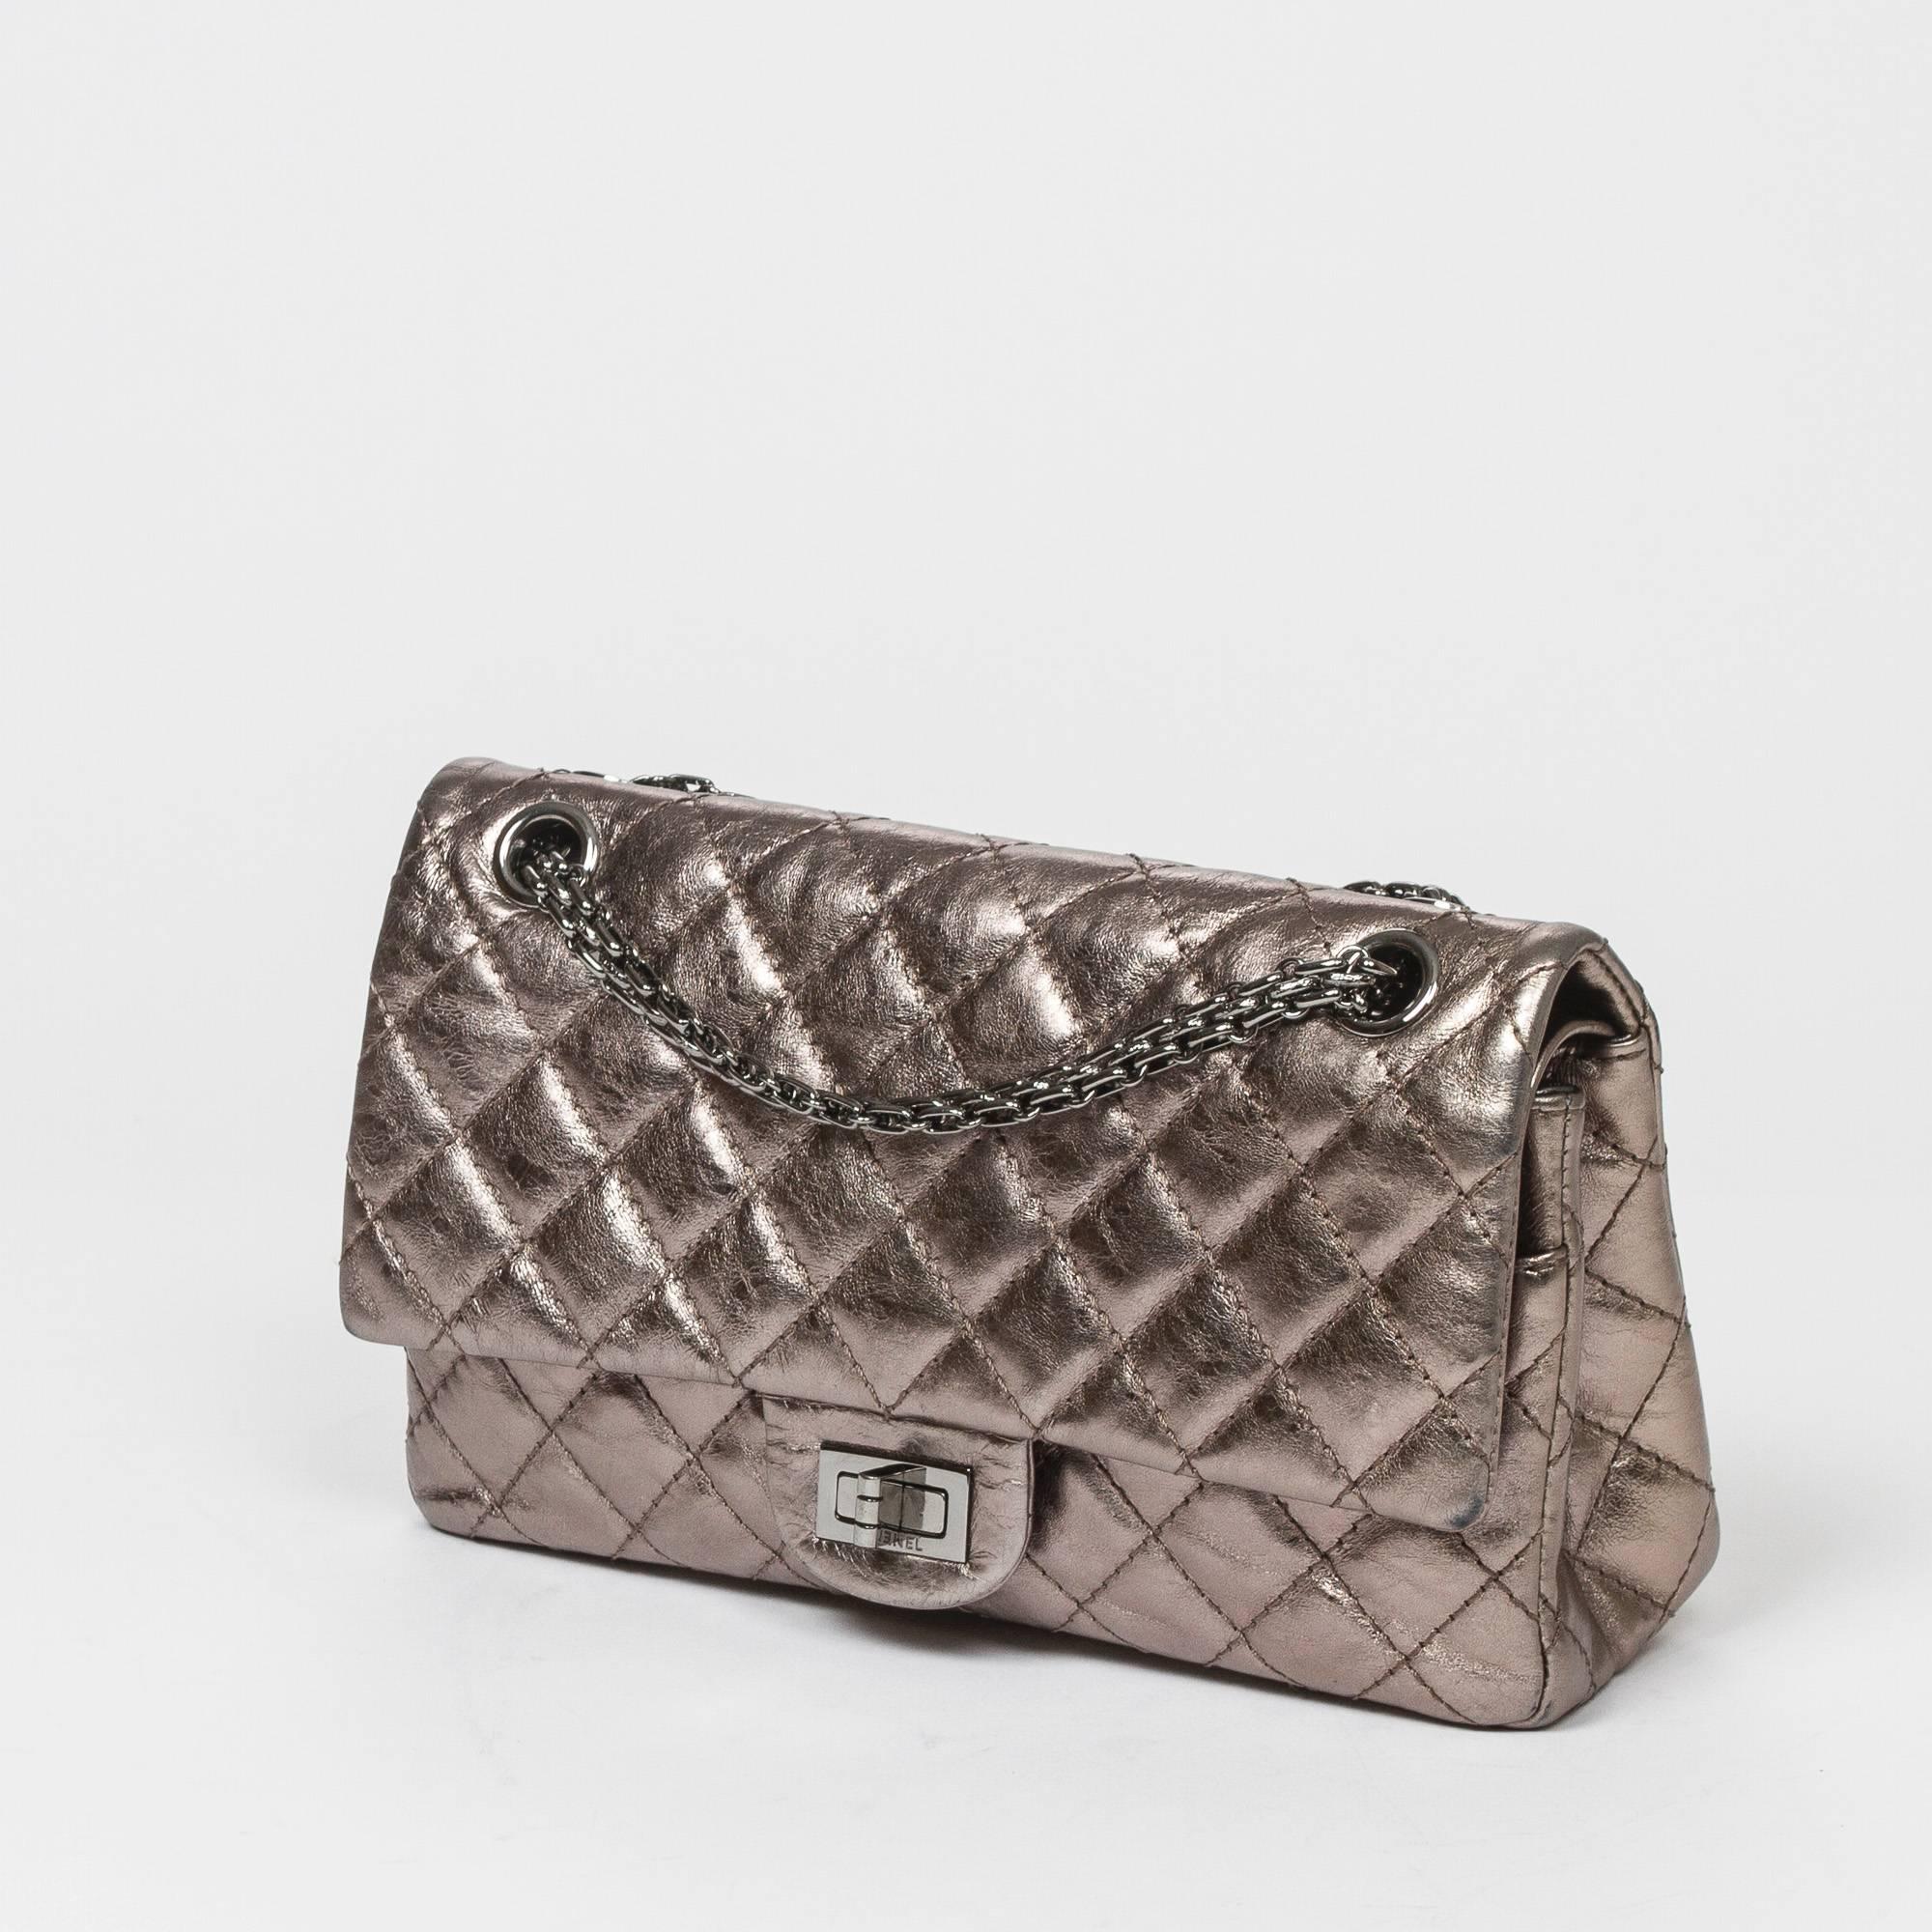 Classic 2.55 Reissue Double Flap Bag 23cm in quilted metallic silver distressed leather with double chain strap and 